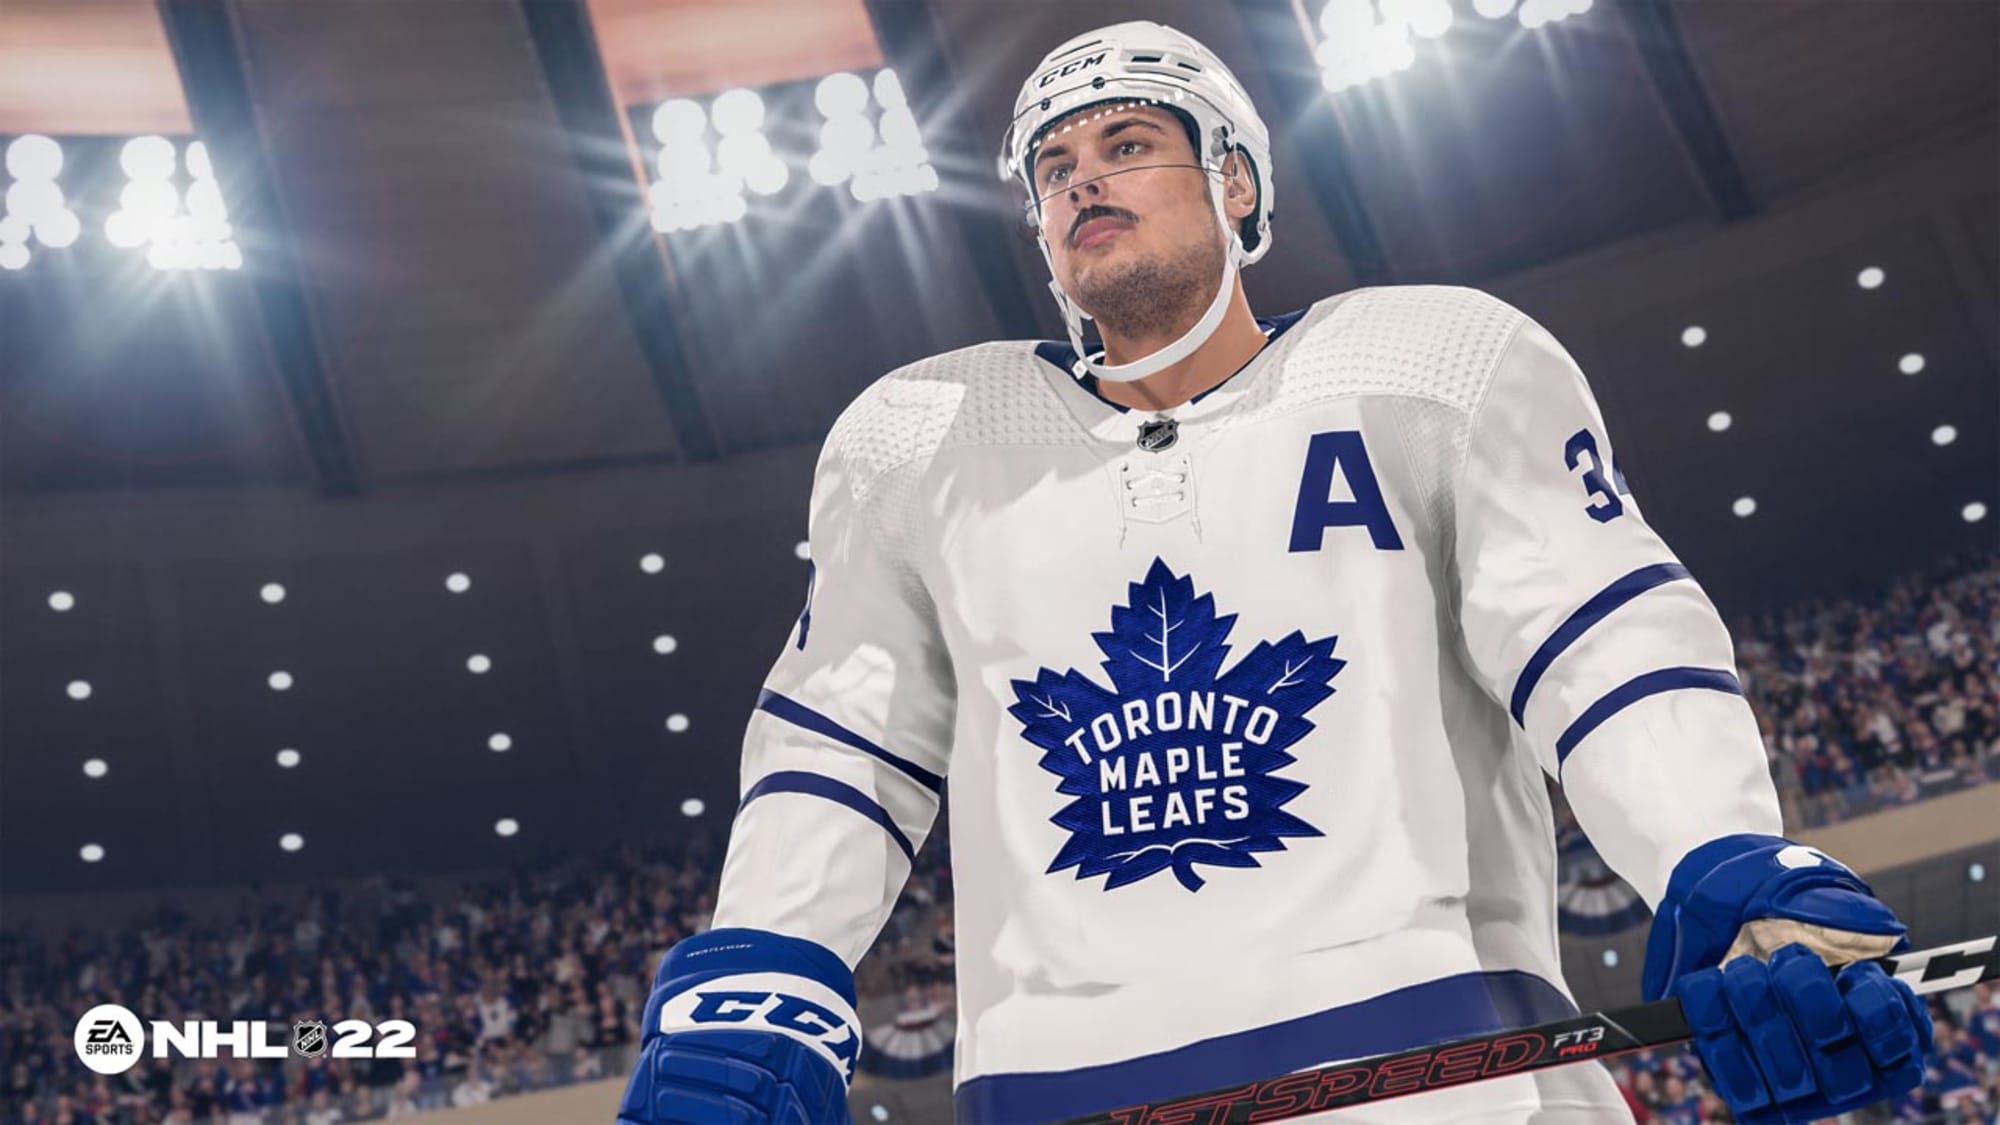 Nhl 22 Comparing Standard And X Factor Editions